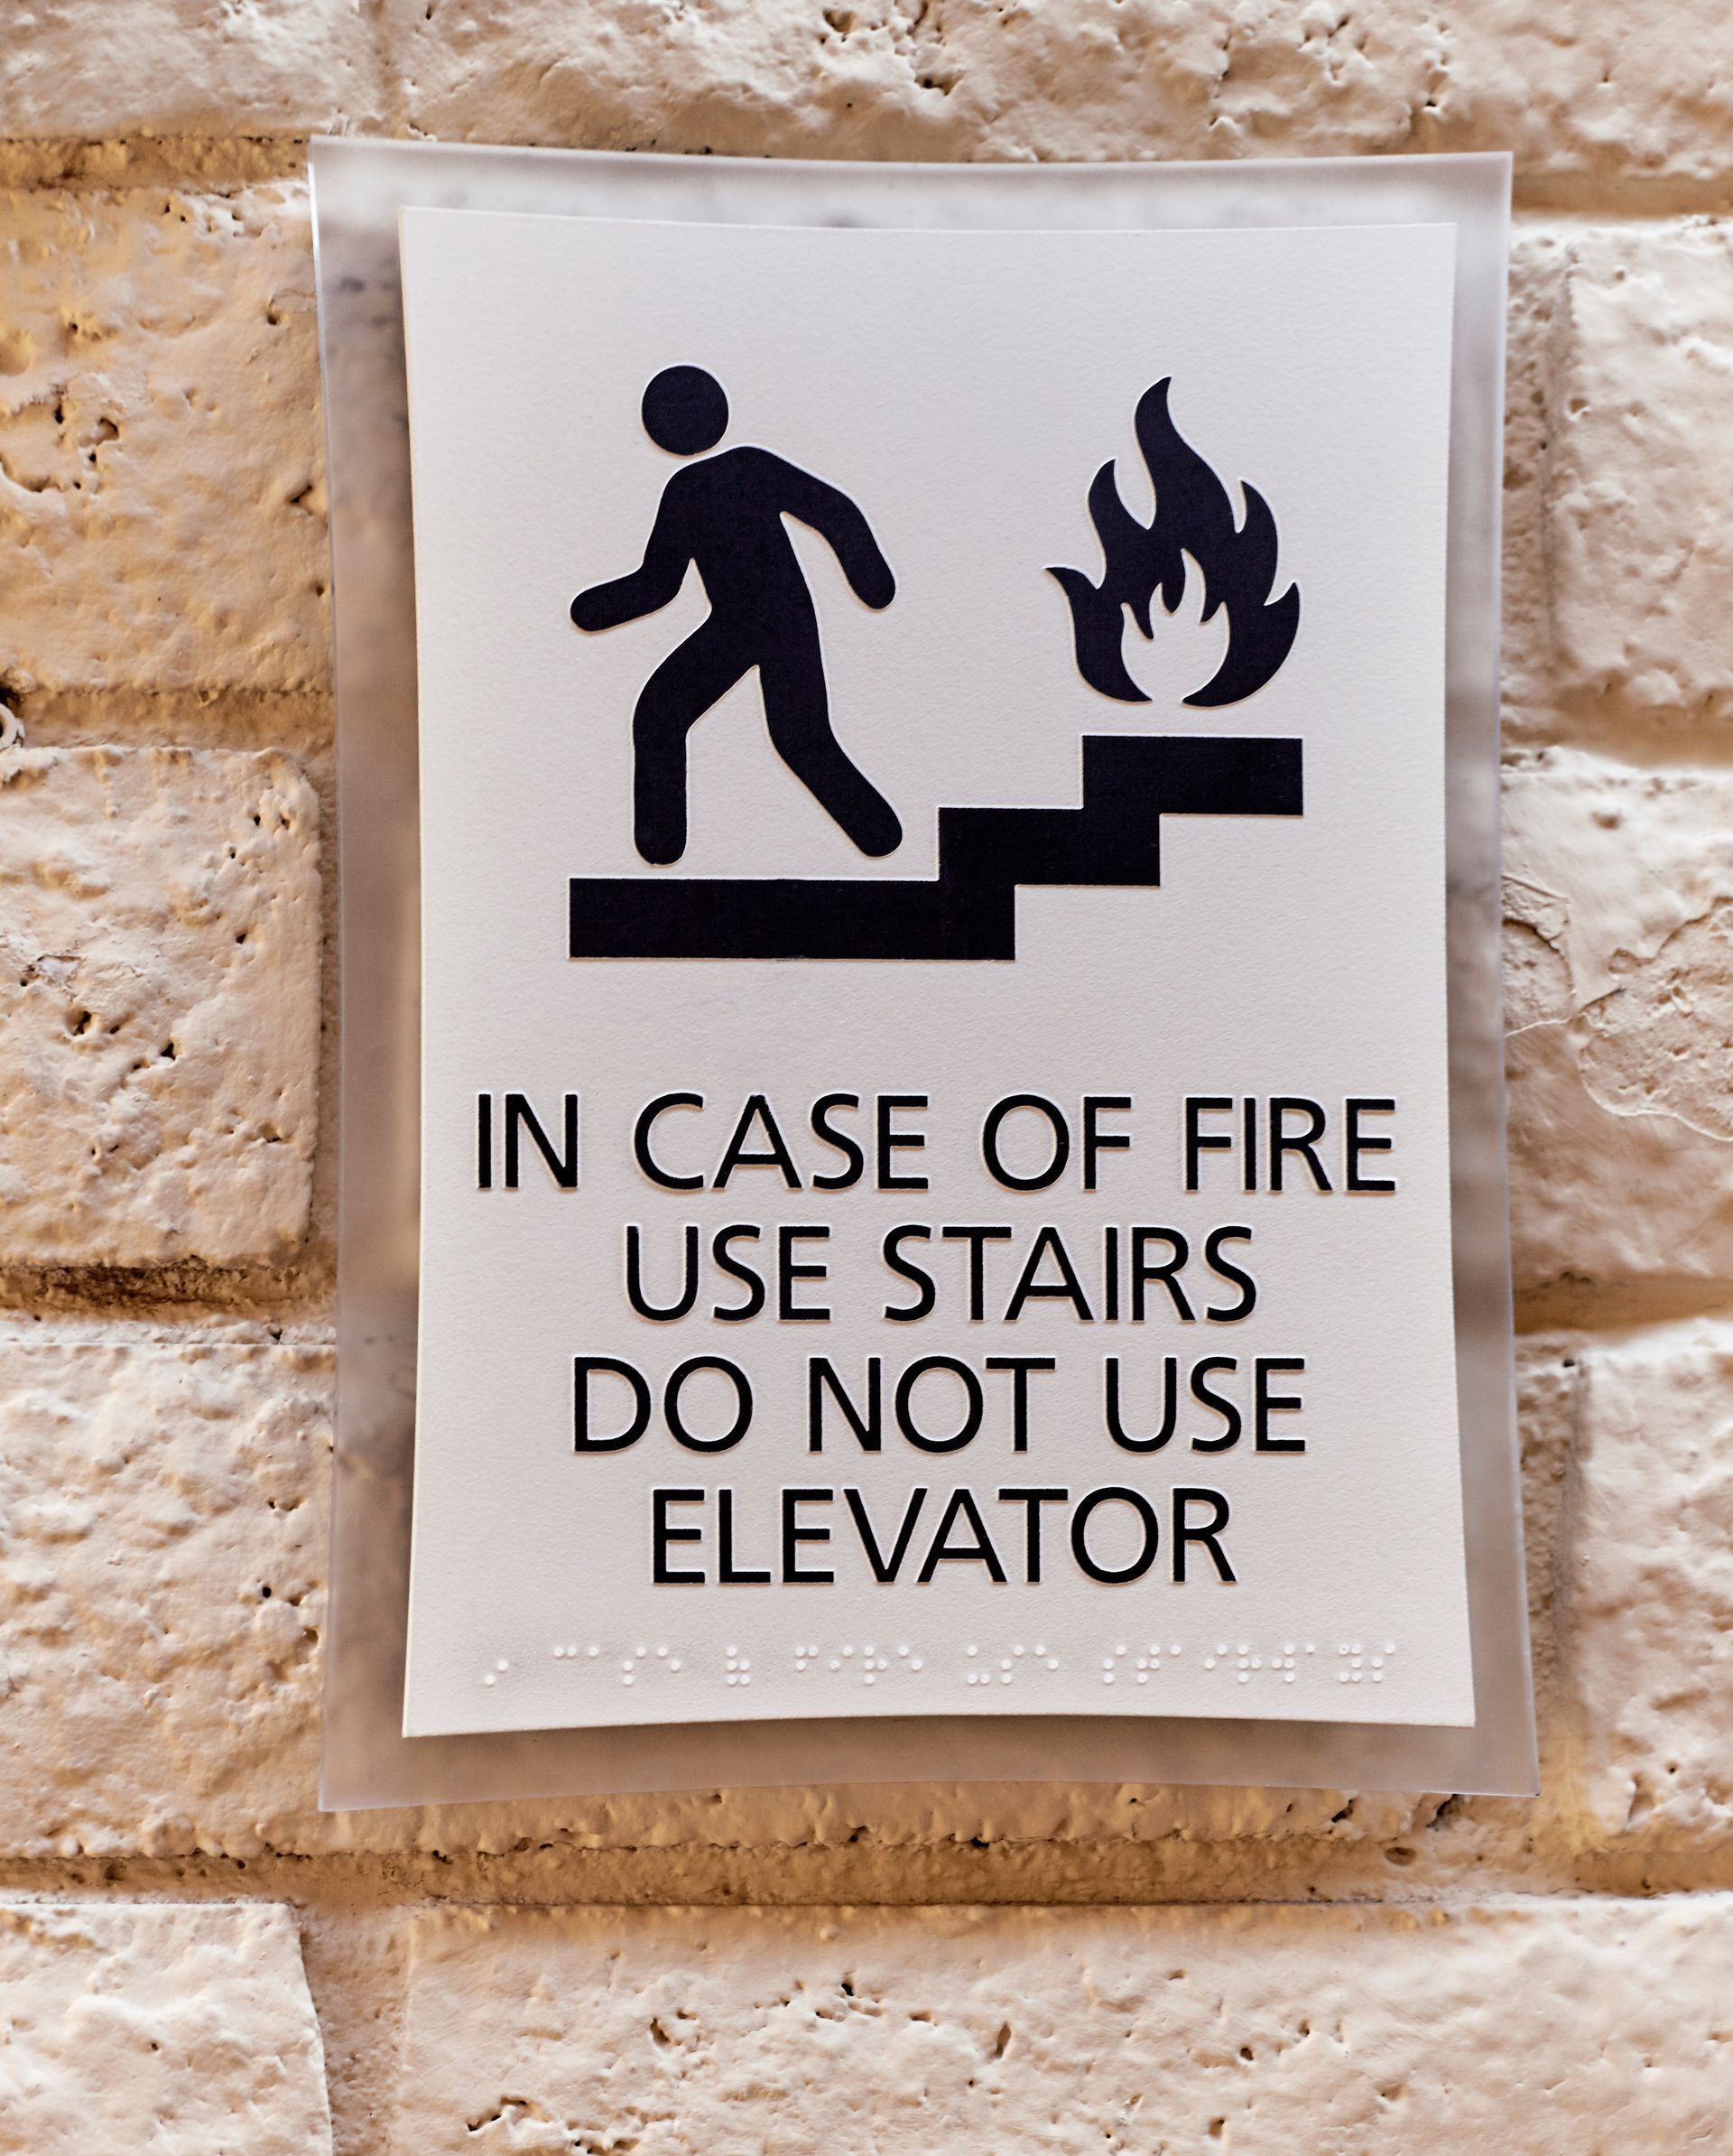 A sign which says 'In case of Fire, Use Stairs' in standard text and braille.